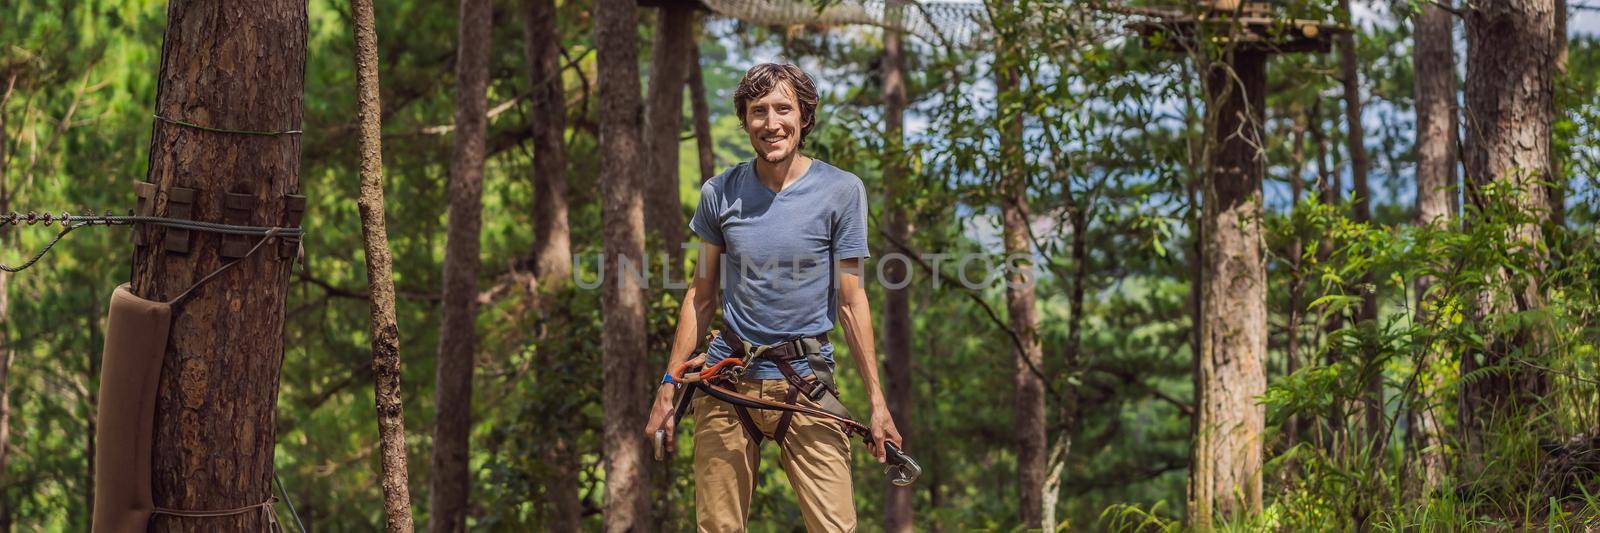 Young attractive man in adventure rope park in safety equipment BANNER, LONG FORMAT by galitskaya